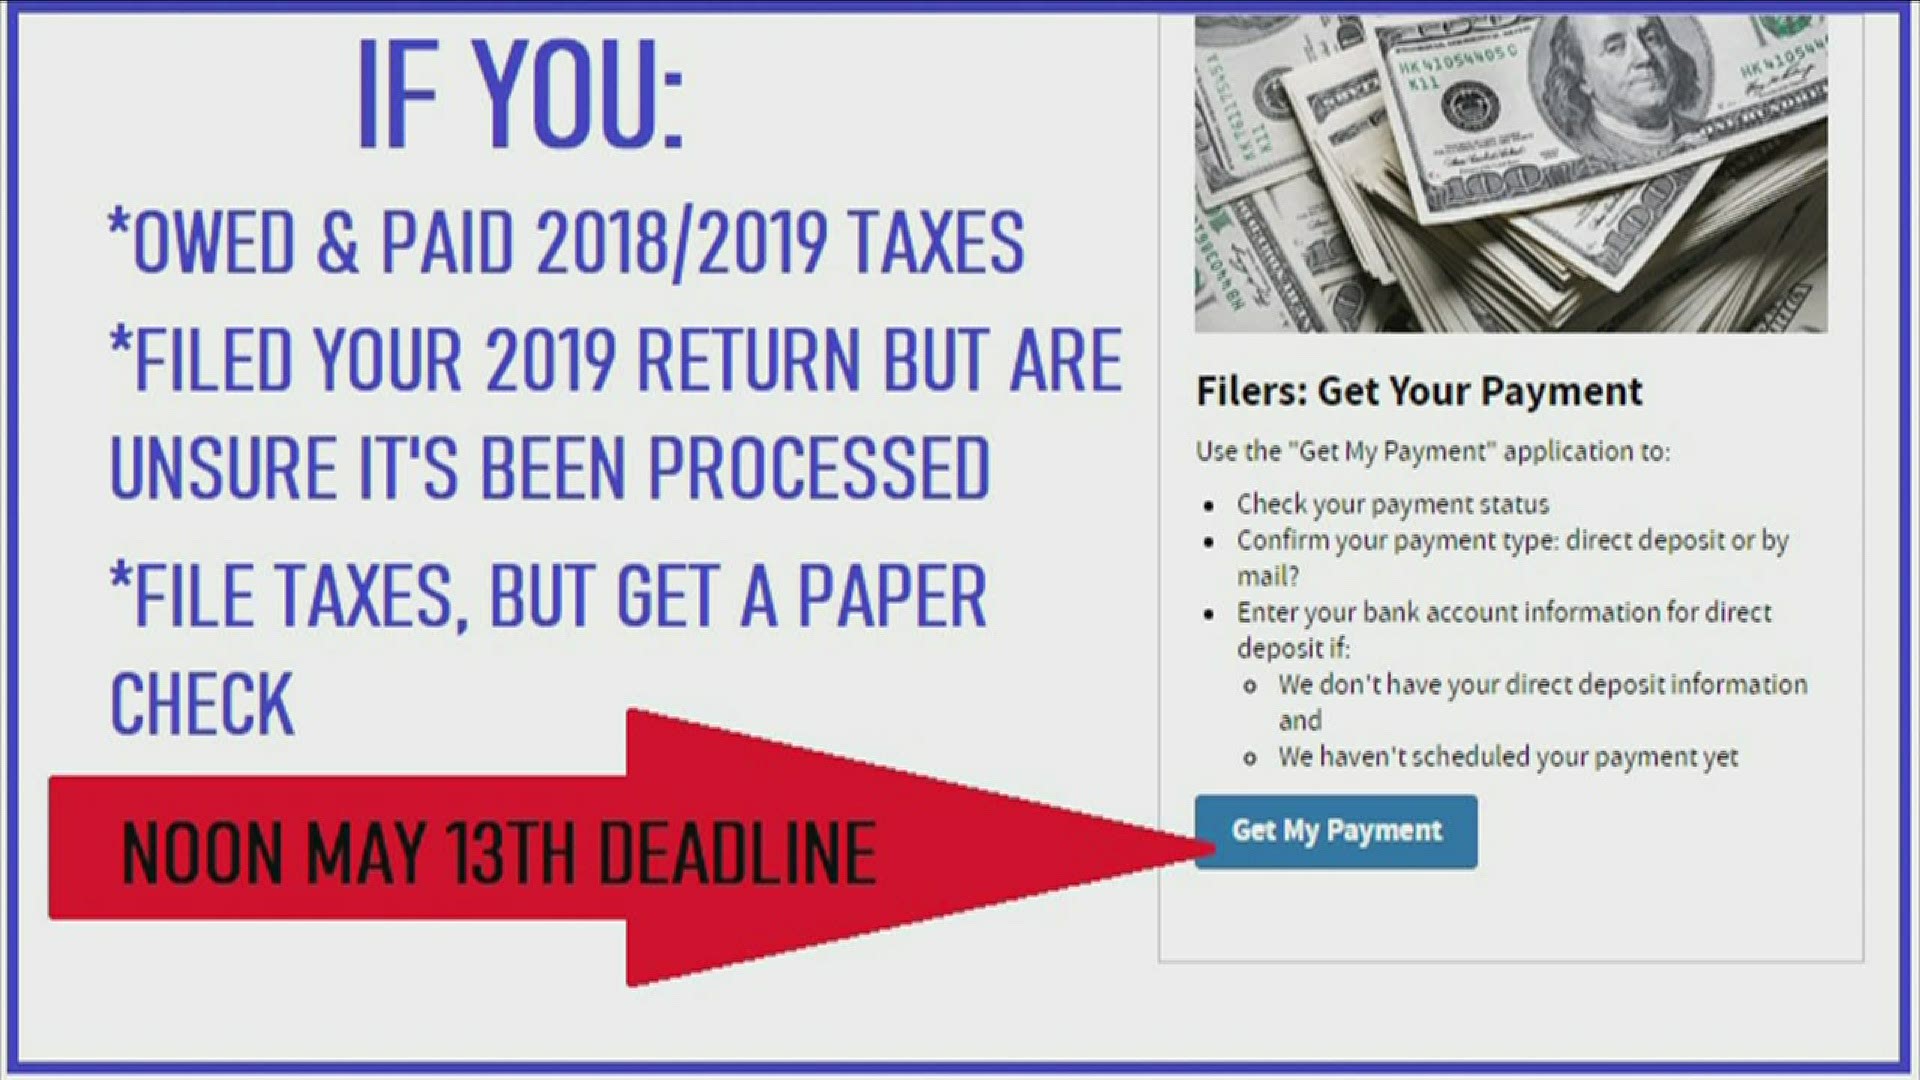 You have until noon May 13th to get your direct deposit information in to get your stimulus check. If you don't, you will get a paper check in the coming months.